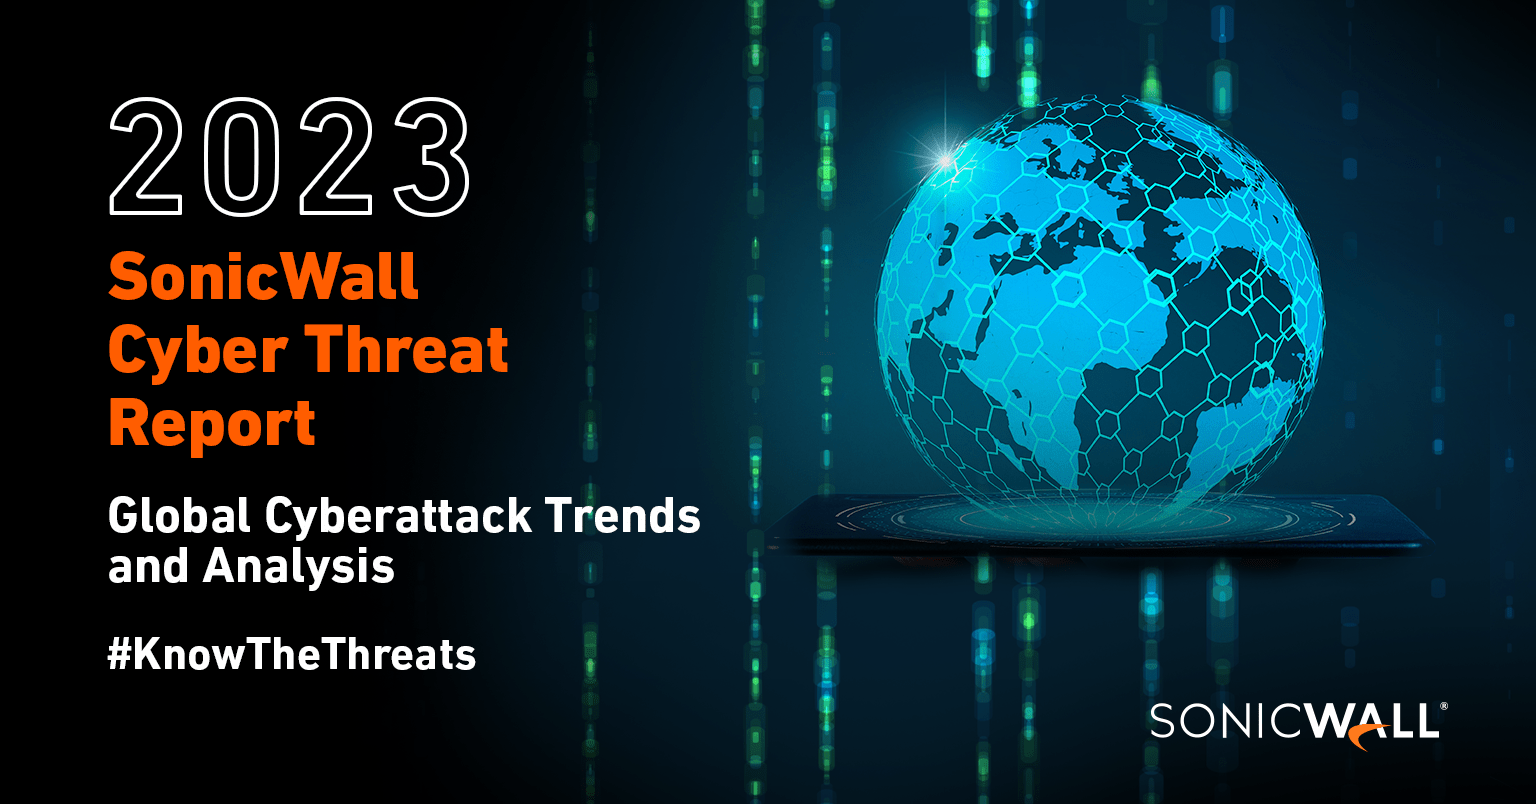 Sonicwall 2023 cyber threat report image